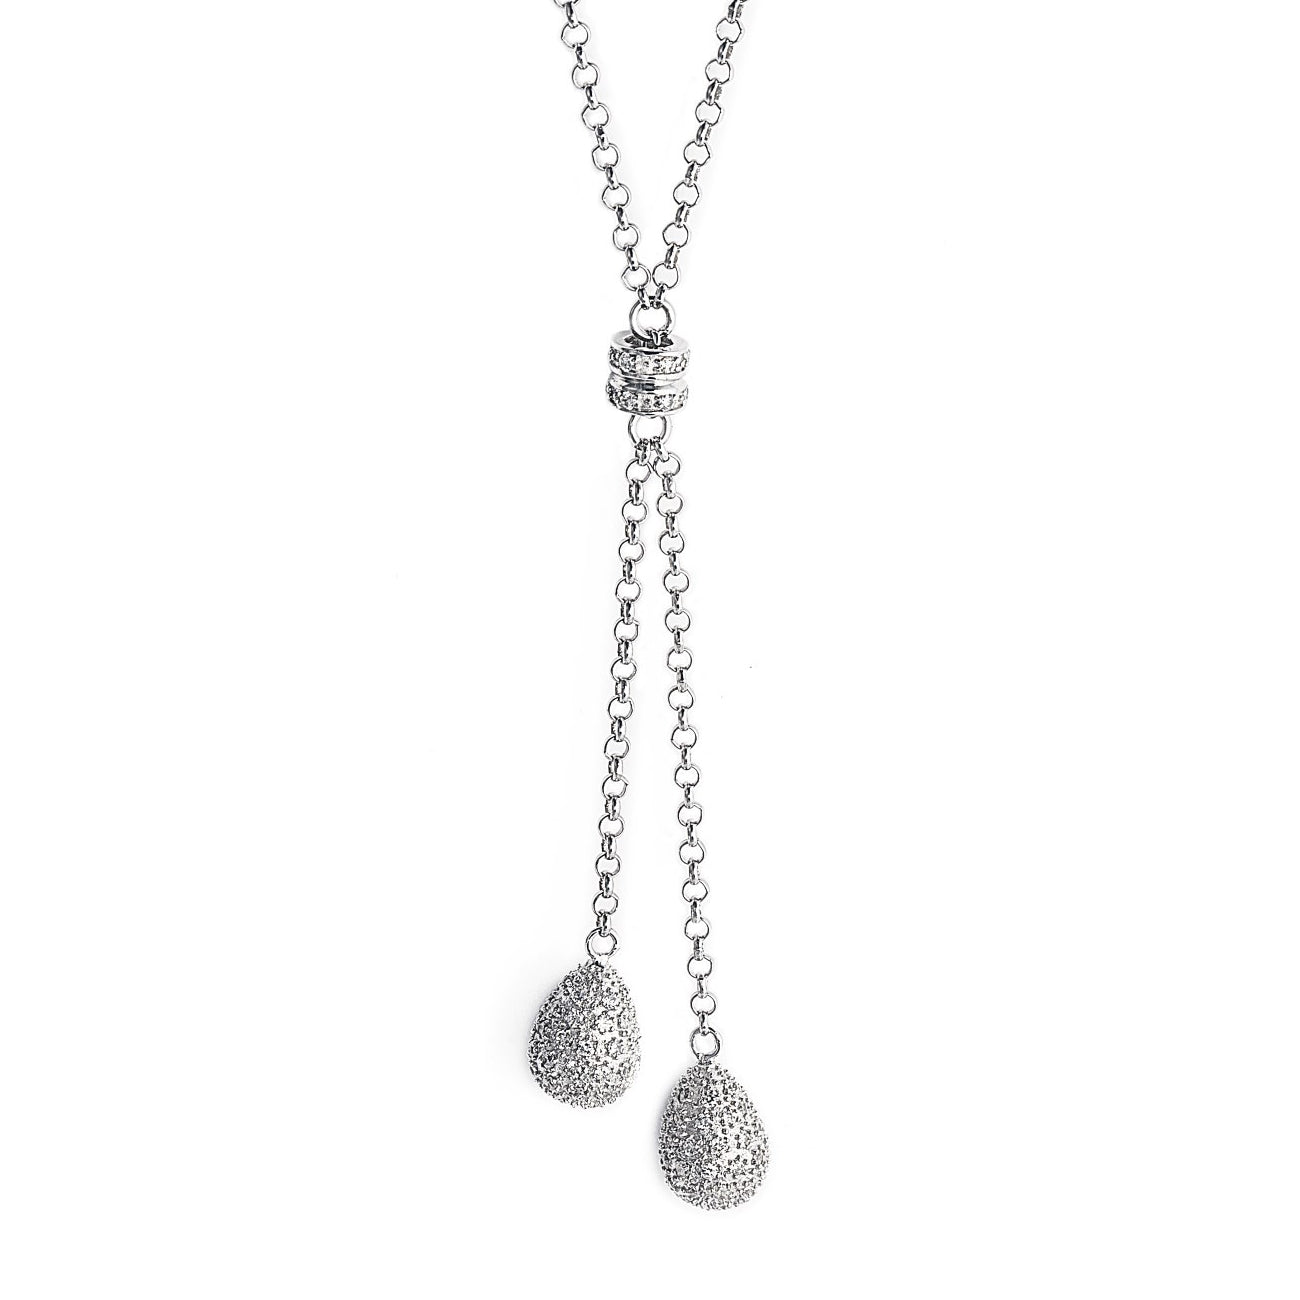 The stunning long Diva Teardrop Necklace in 925 sterling silver features two teardrops encrusted with clear cubic zirconia stones for a wow factor. Shop Bellagio & Co Jewellery Online. Worldwide shipping.